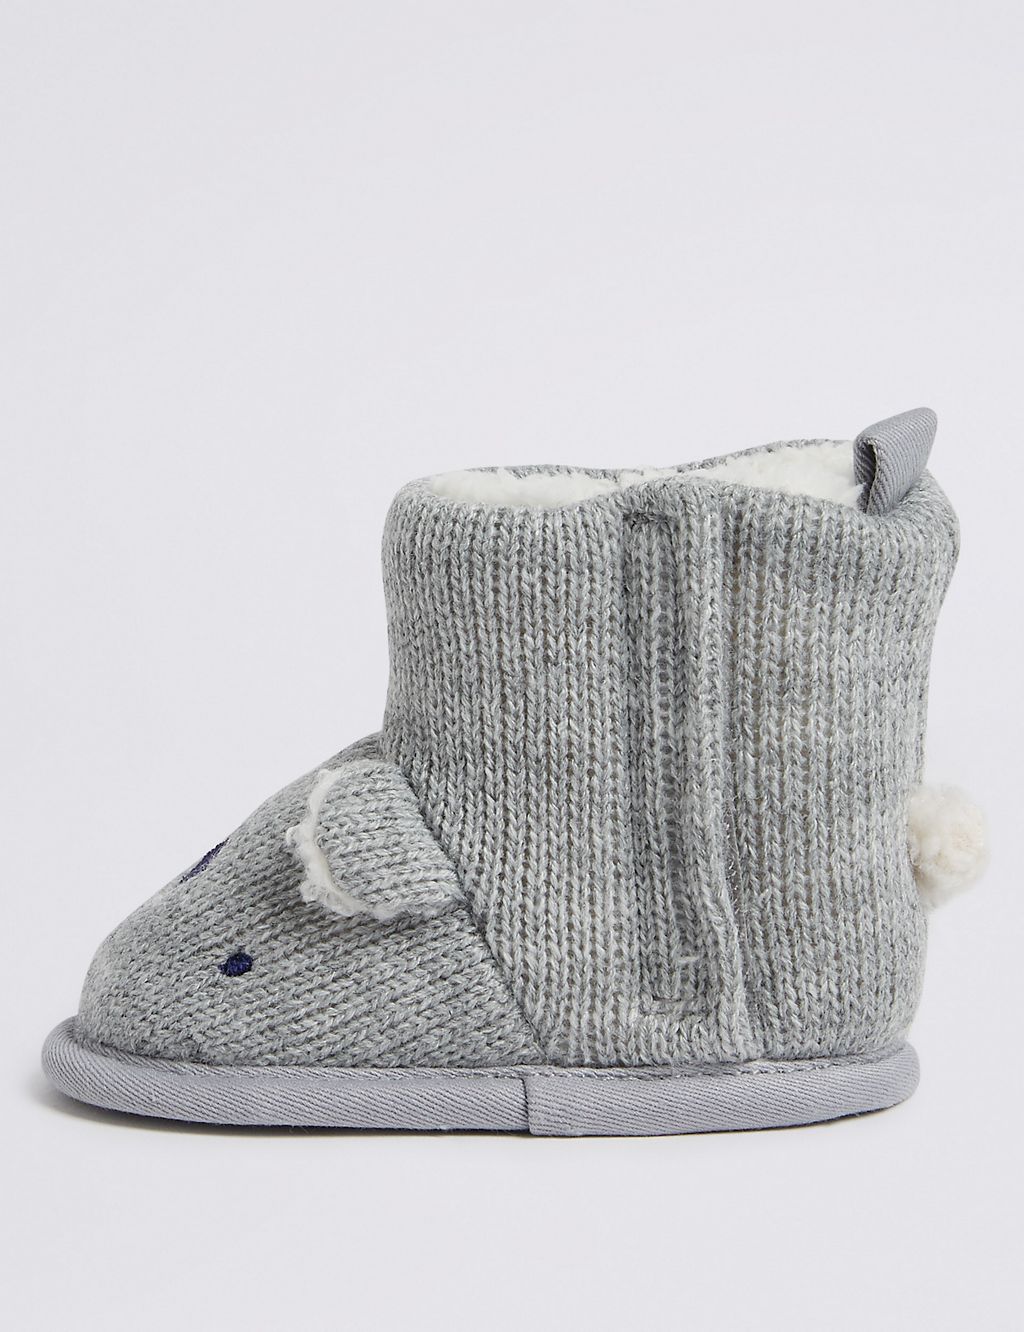 Baby Bear Knitted Pram Boots 2 of 4